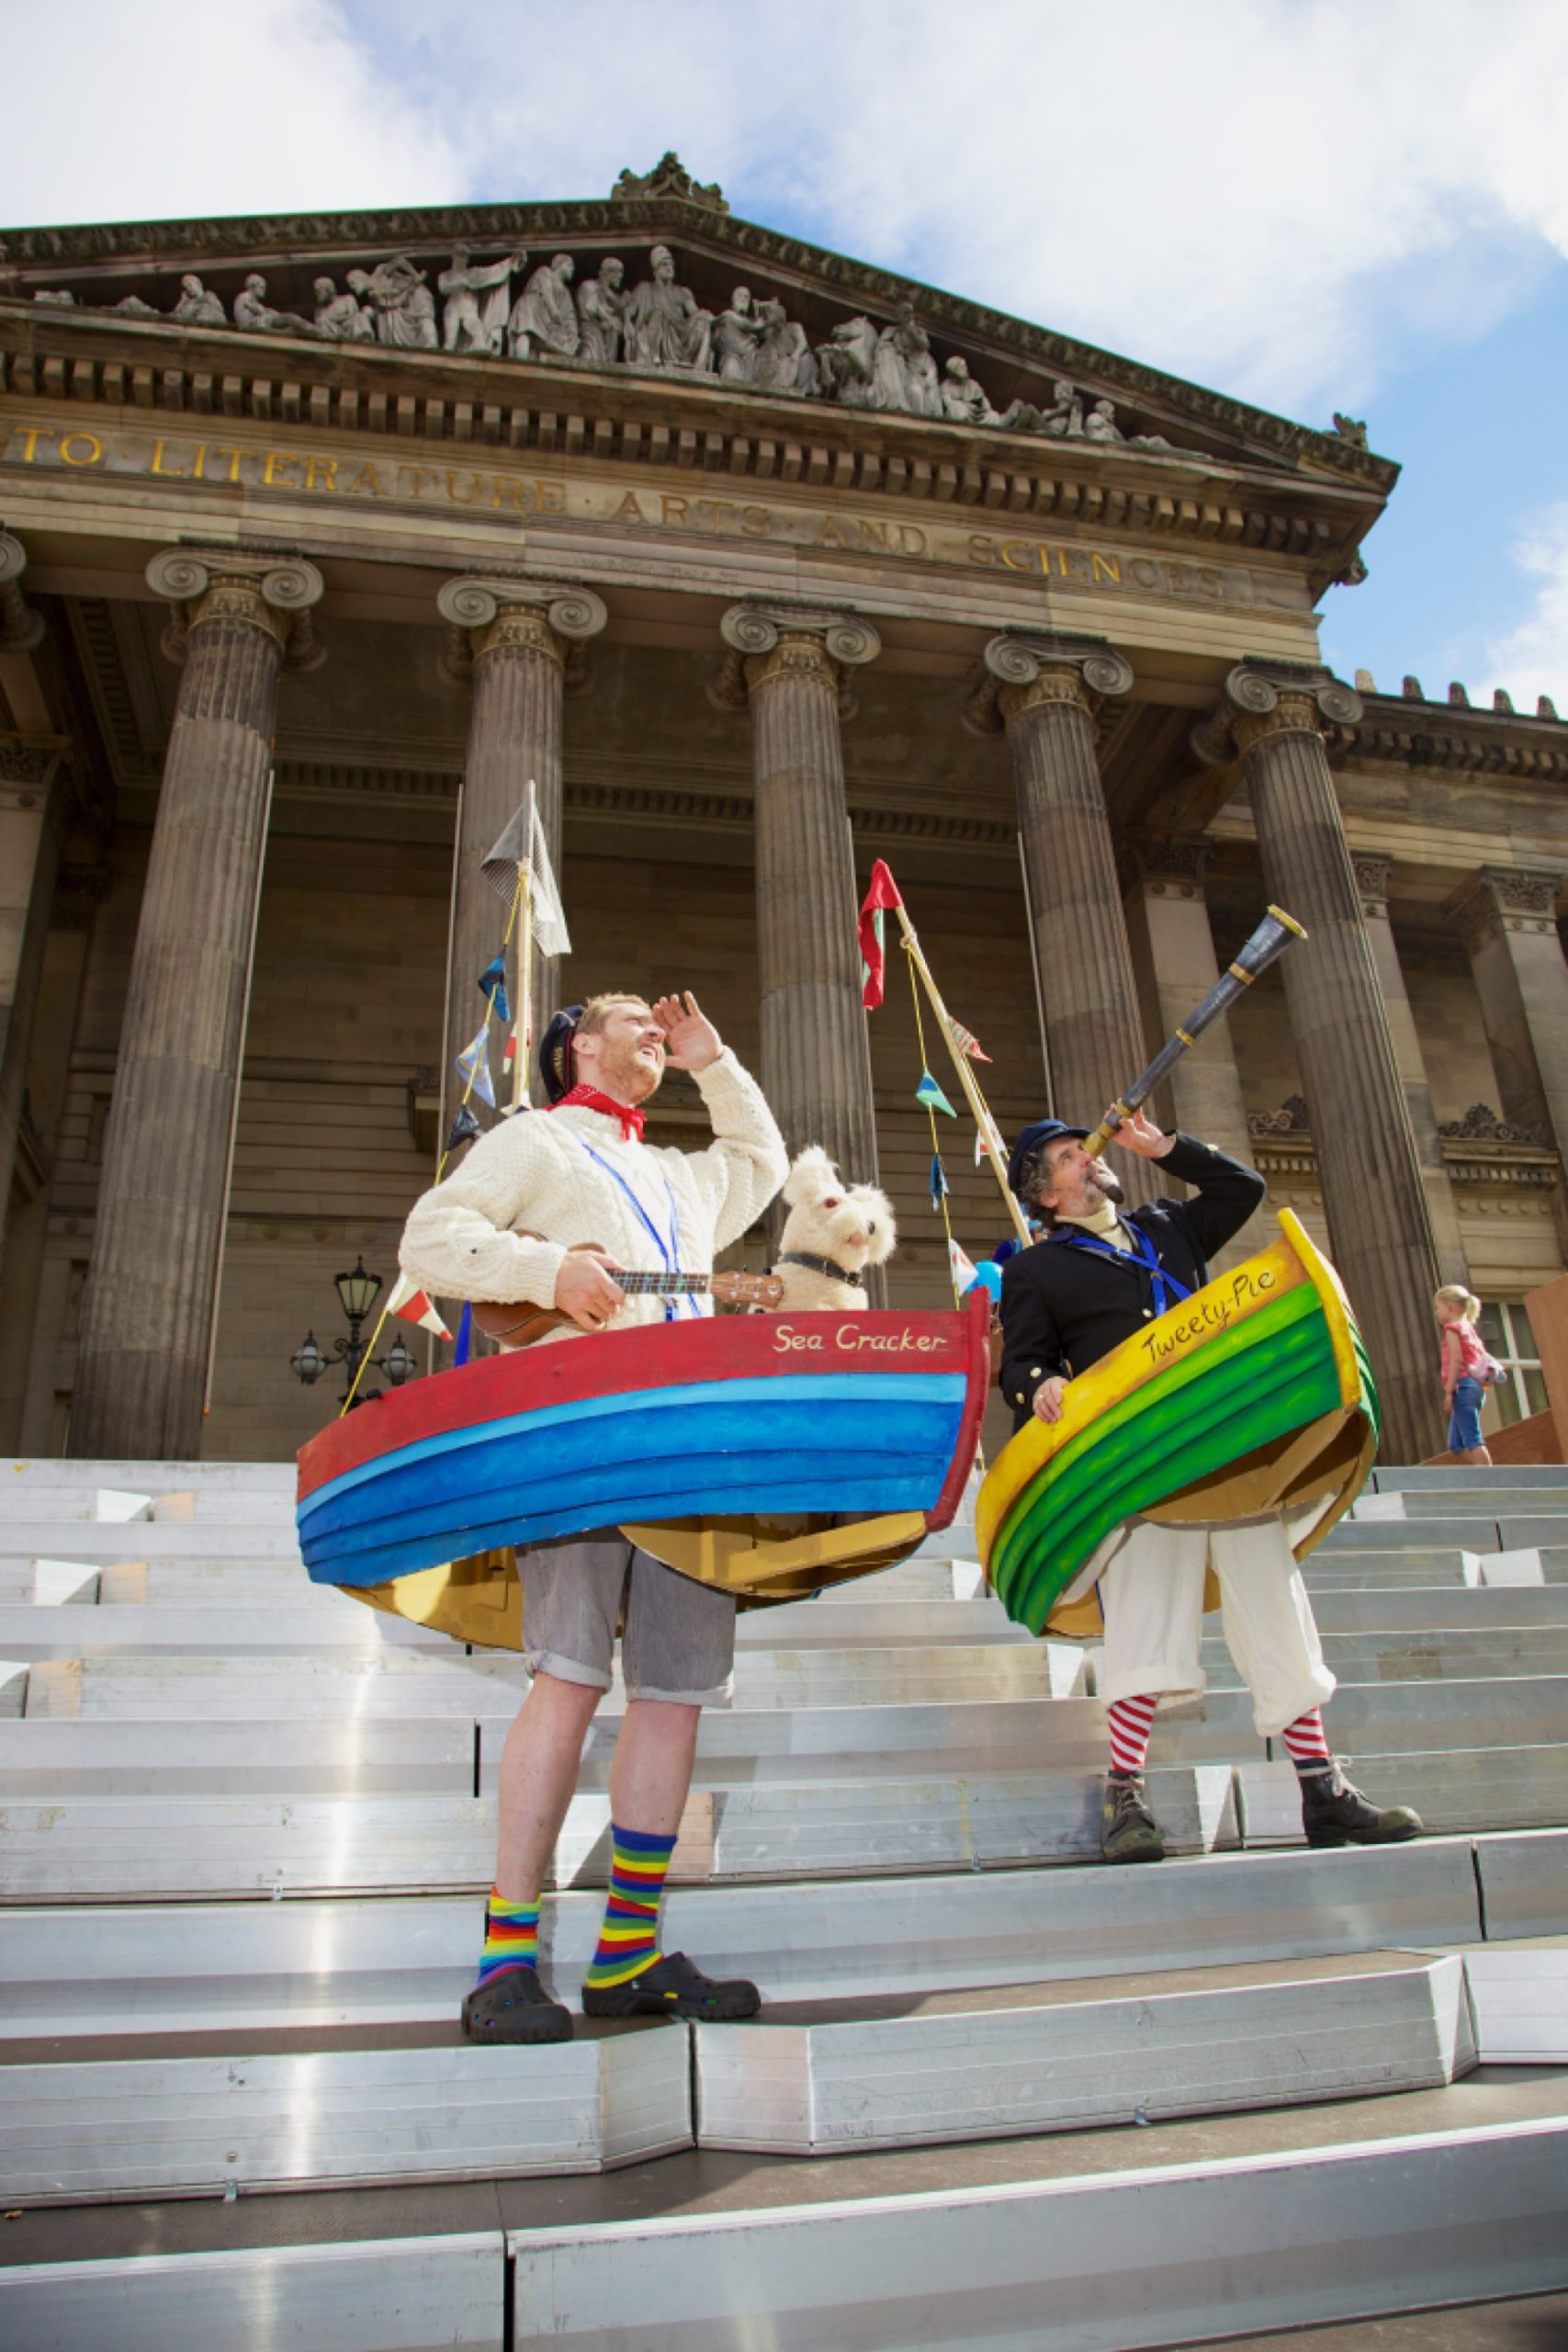 A performance on the Harris Flights Steps installation